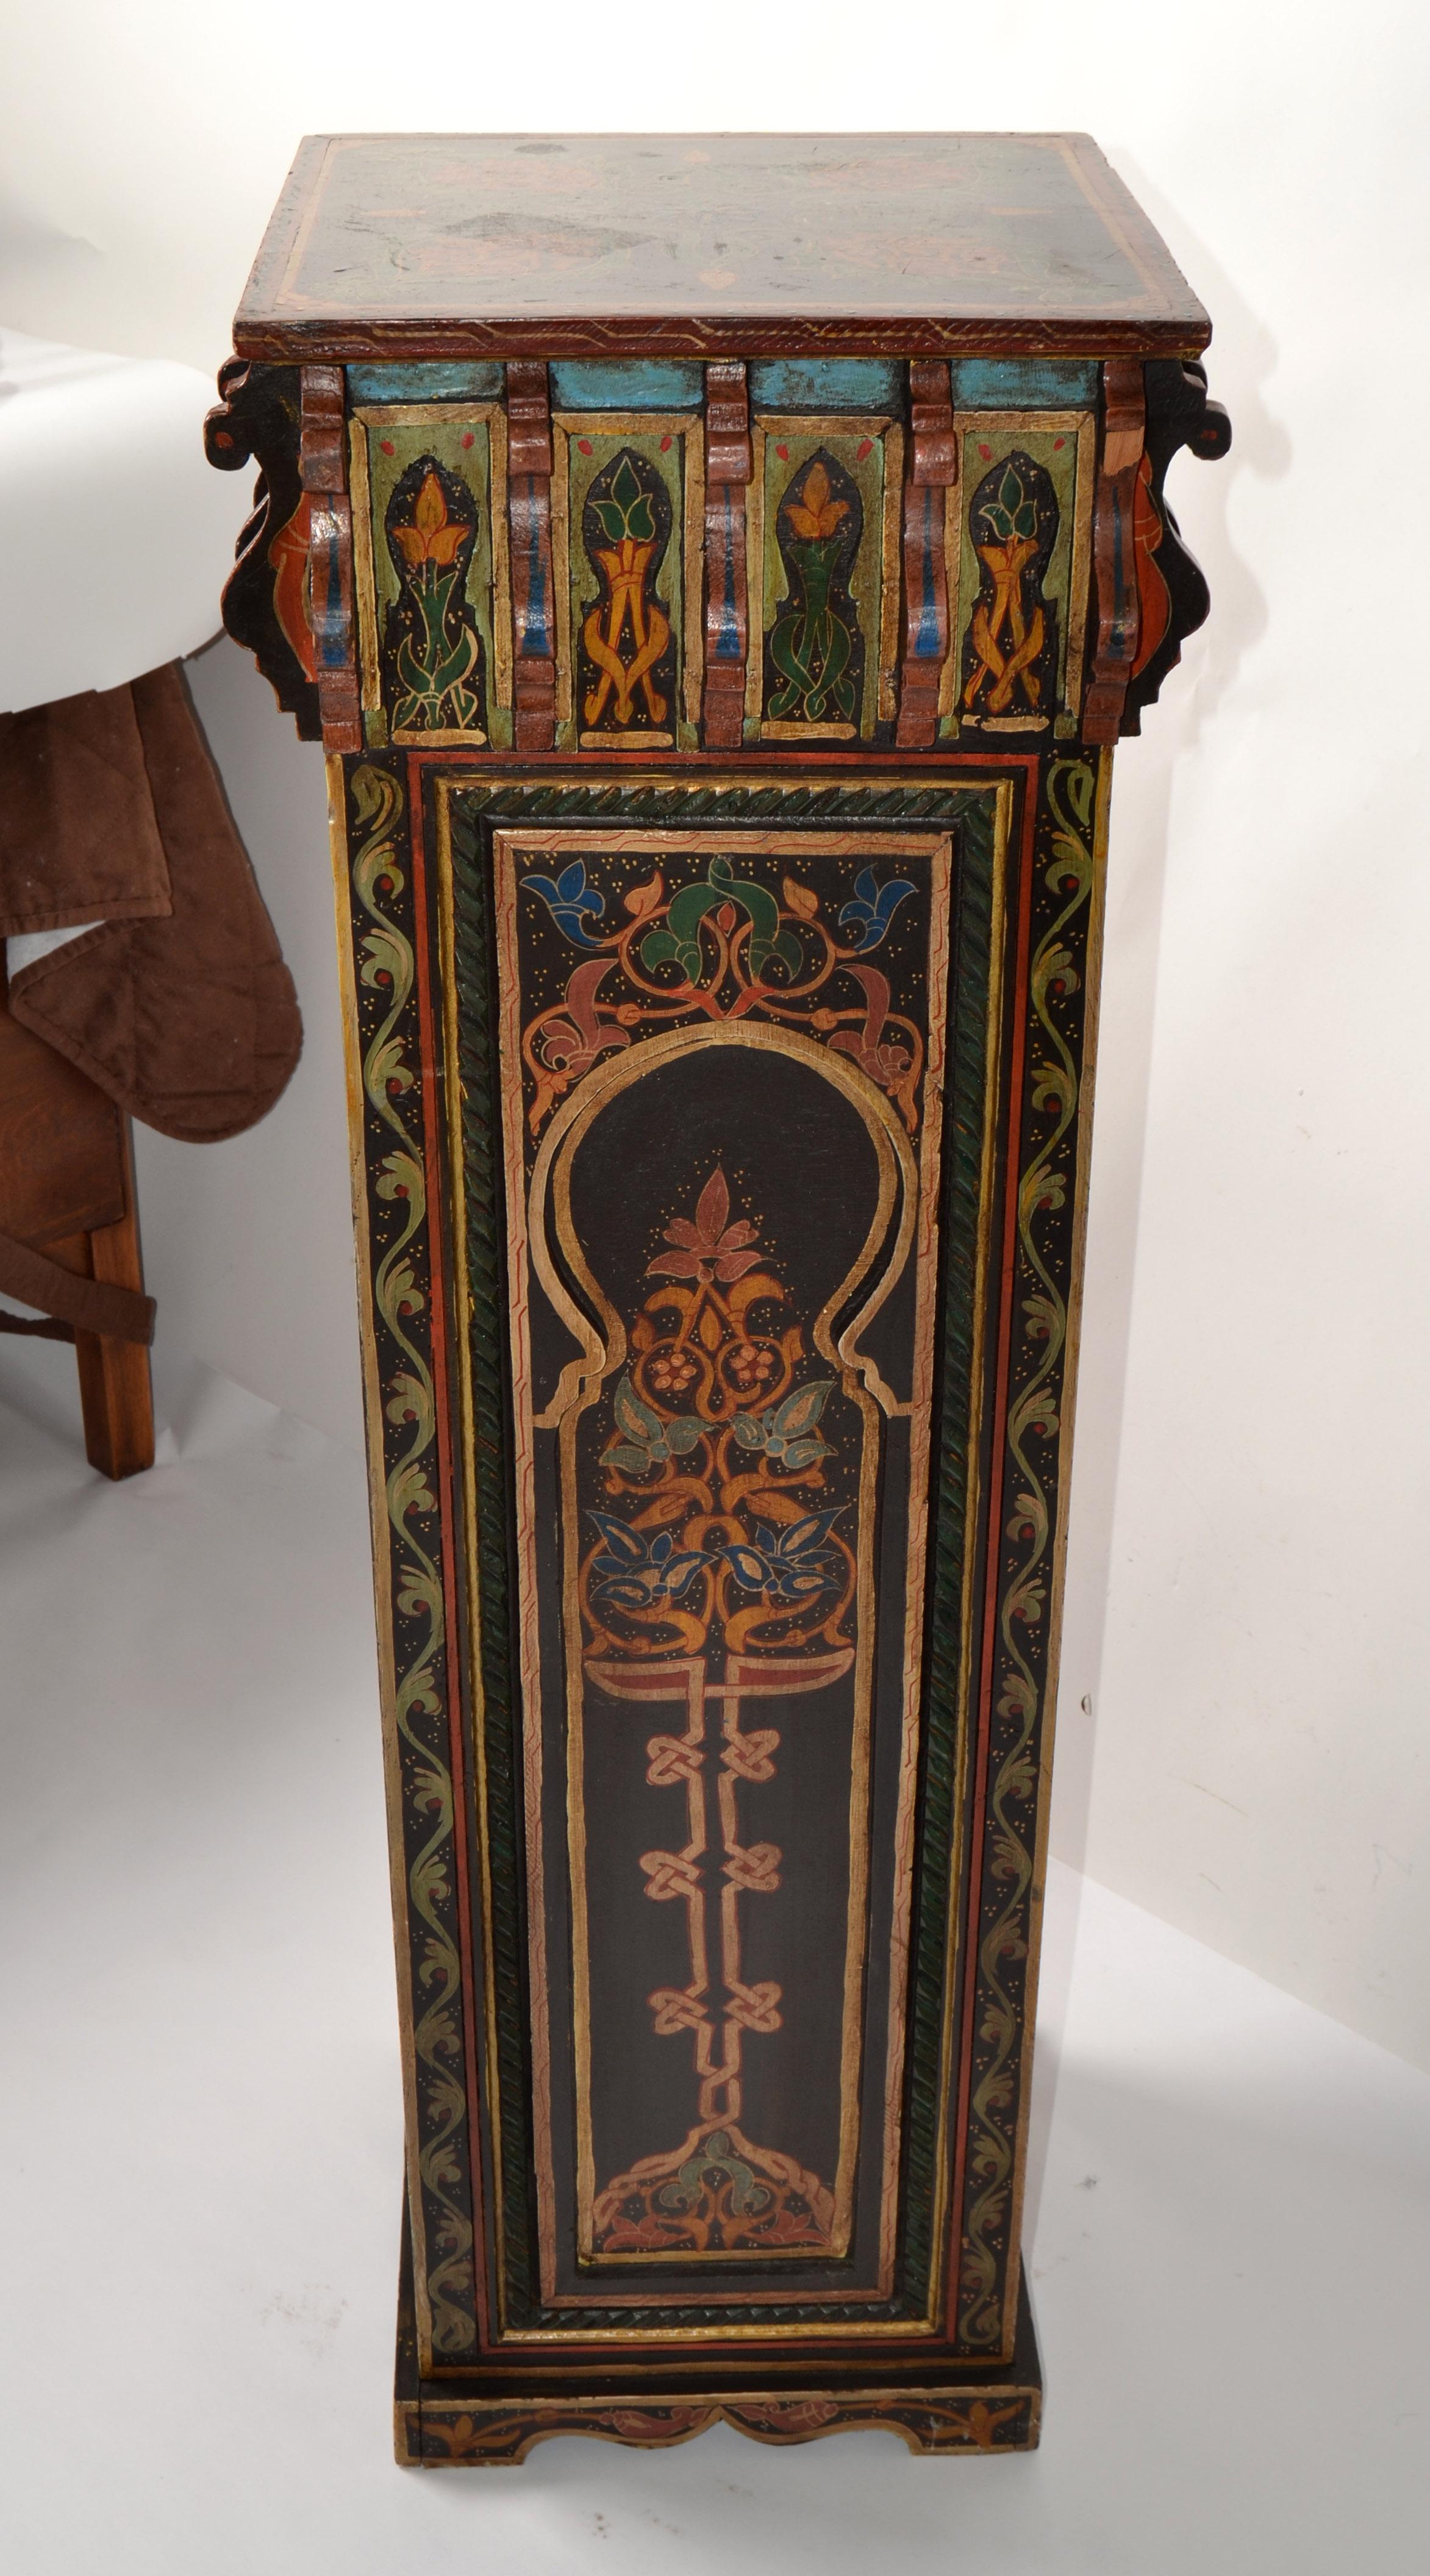 This late 19th Century antique square Fruitwood Pedestal is highly accented with intricate hand carving and hand painting flowers and leaves done in the Anglo-Indian style.
The carving border and side panels of this Column are accented by cut out